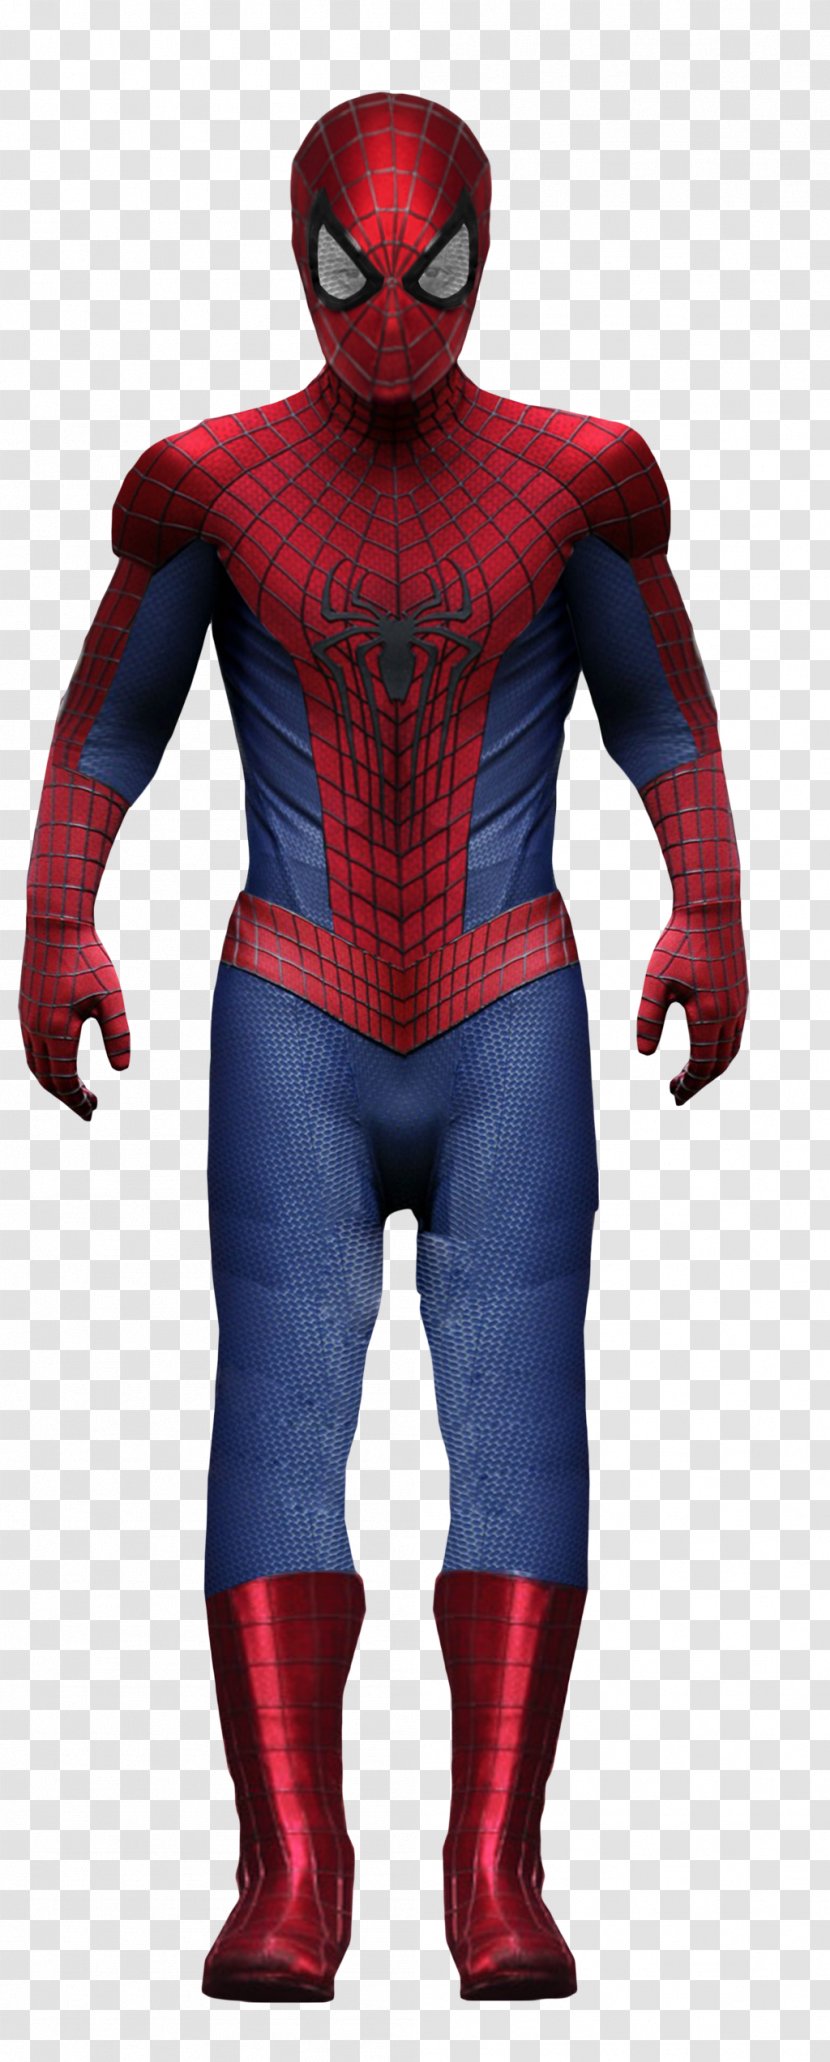 Spider-Man: Homecoming Film Series Suit Symbiote Mask - Spiderman Transparent PNG